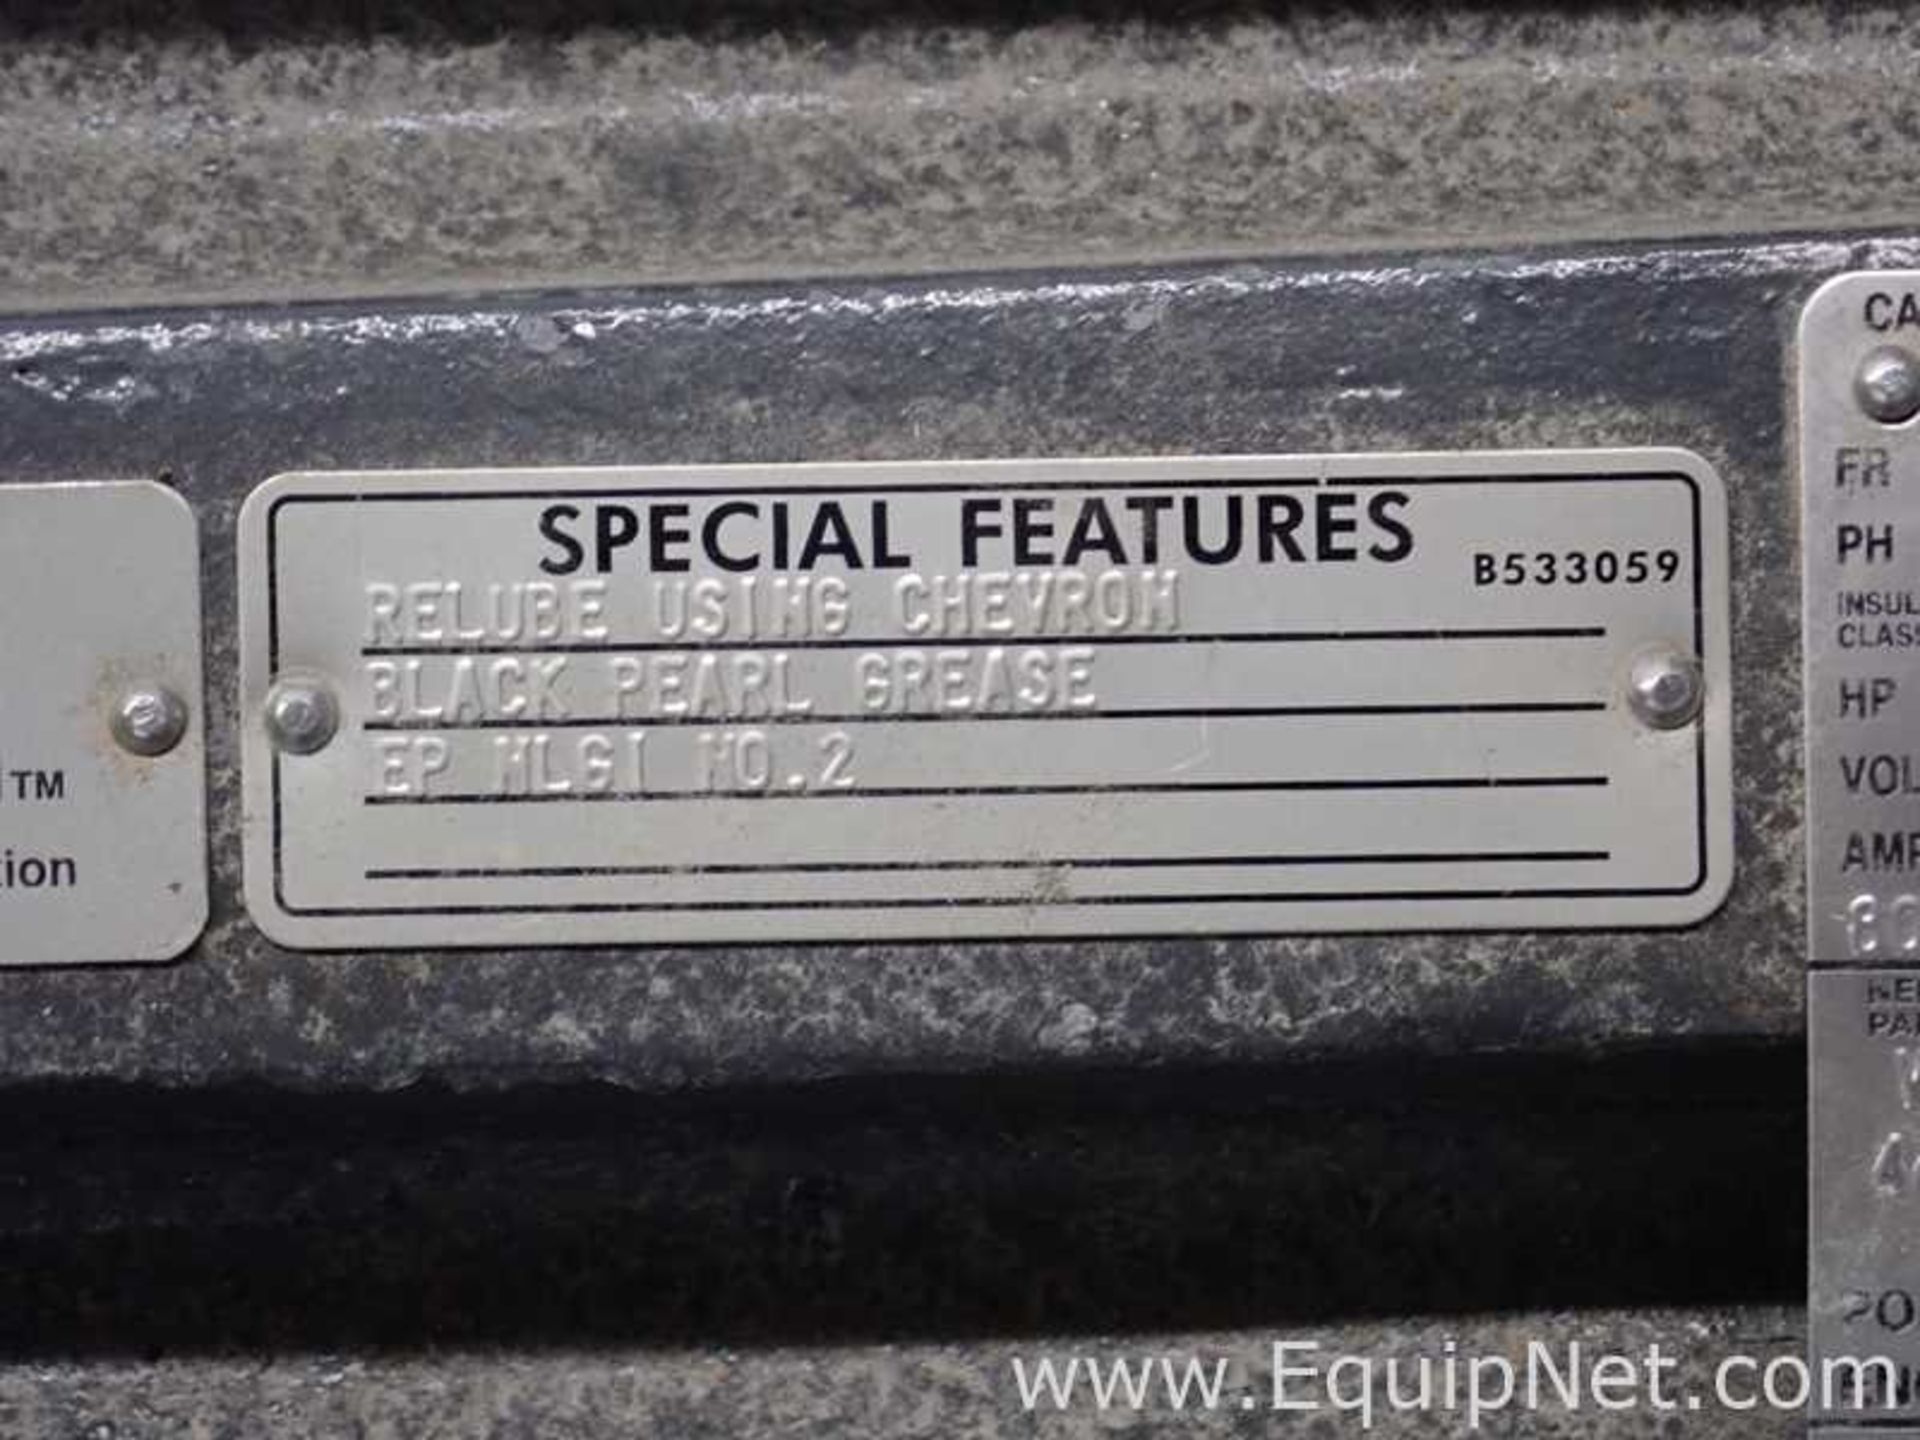 Pace Company CL 44ARRG8 General Air Handler Fan and Motor - Image 36 of 47